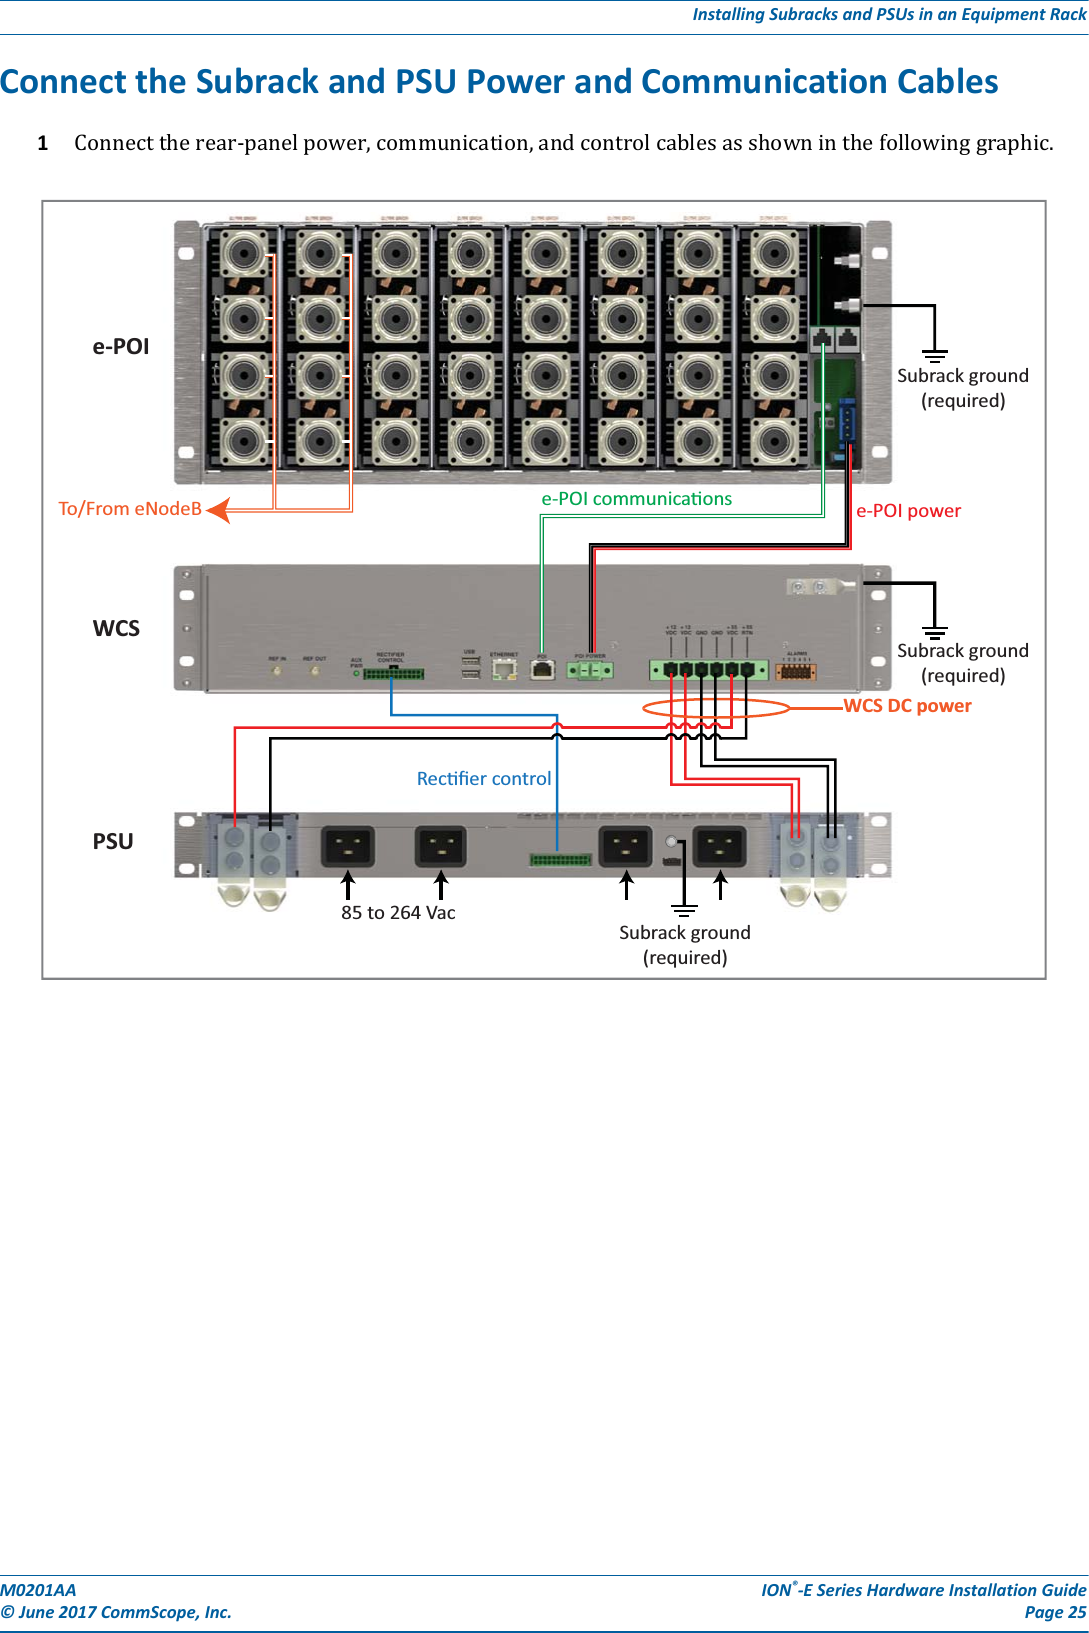 M0201AA ION®-E Series Hardware Installation Guide© June 2017 CommScope, Inc. Page 25Installing Subracks and PSUs in an Equipment RackConnect the Subrack and PSU Power and Communication Cables1Connecttherear-panelpower,communication,andcontrolcablesasshowninthefollowinggraphic.e-POIWCSPSUTo/From eNodeB e-POI communicaons e-POI powerSubrack ground(required)WCS DC powerSubrack ground(required)Recﬁer controlSubrack ground(required)85 to 264 Vac